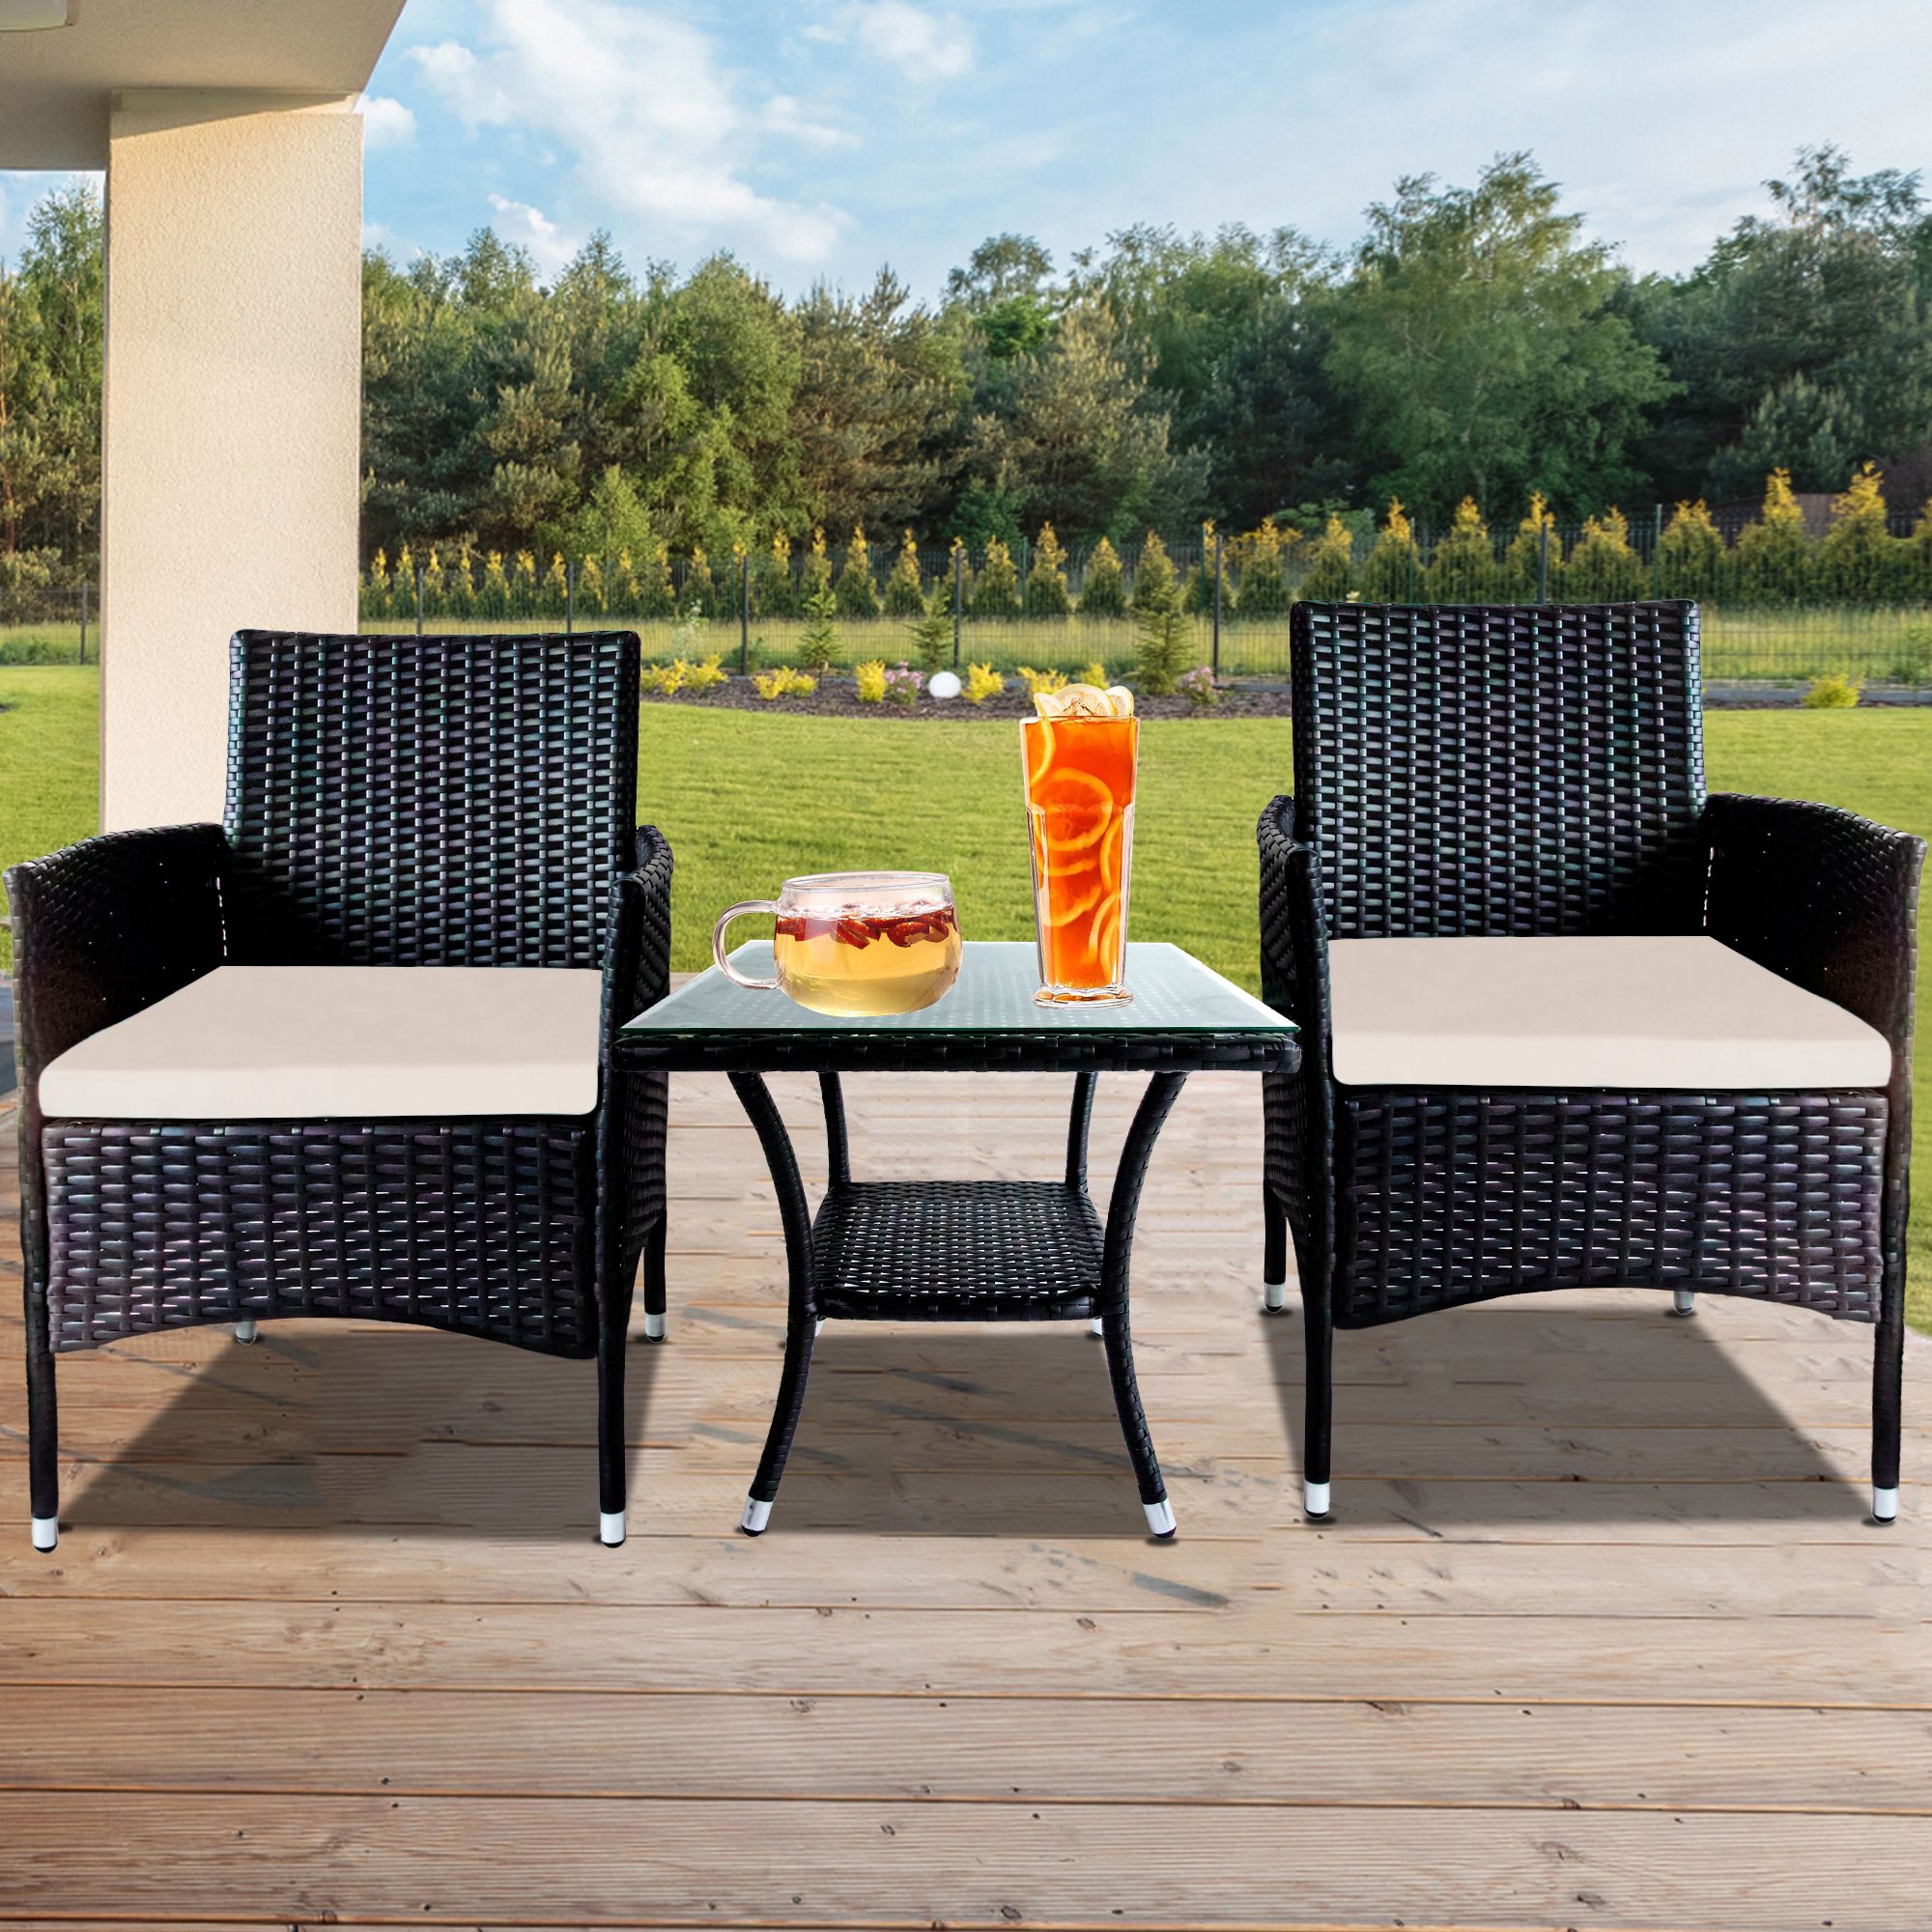 Modern 2 Tier Outdoor Tables Outdoor Tables With Trendy 3 Pieces Patio Conversation Chairs Set, Modern Wicker Front Porch Furniture  Set, Outdoor Patio Set With 2 Single Chairs And Double Tier Coffee Table,  Deck Poolside Balcony Furniture Set, Ja3106 – Walmart (View 9 of 15)